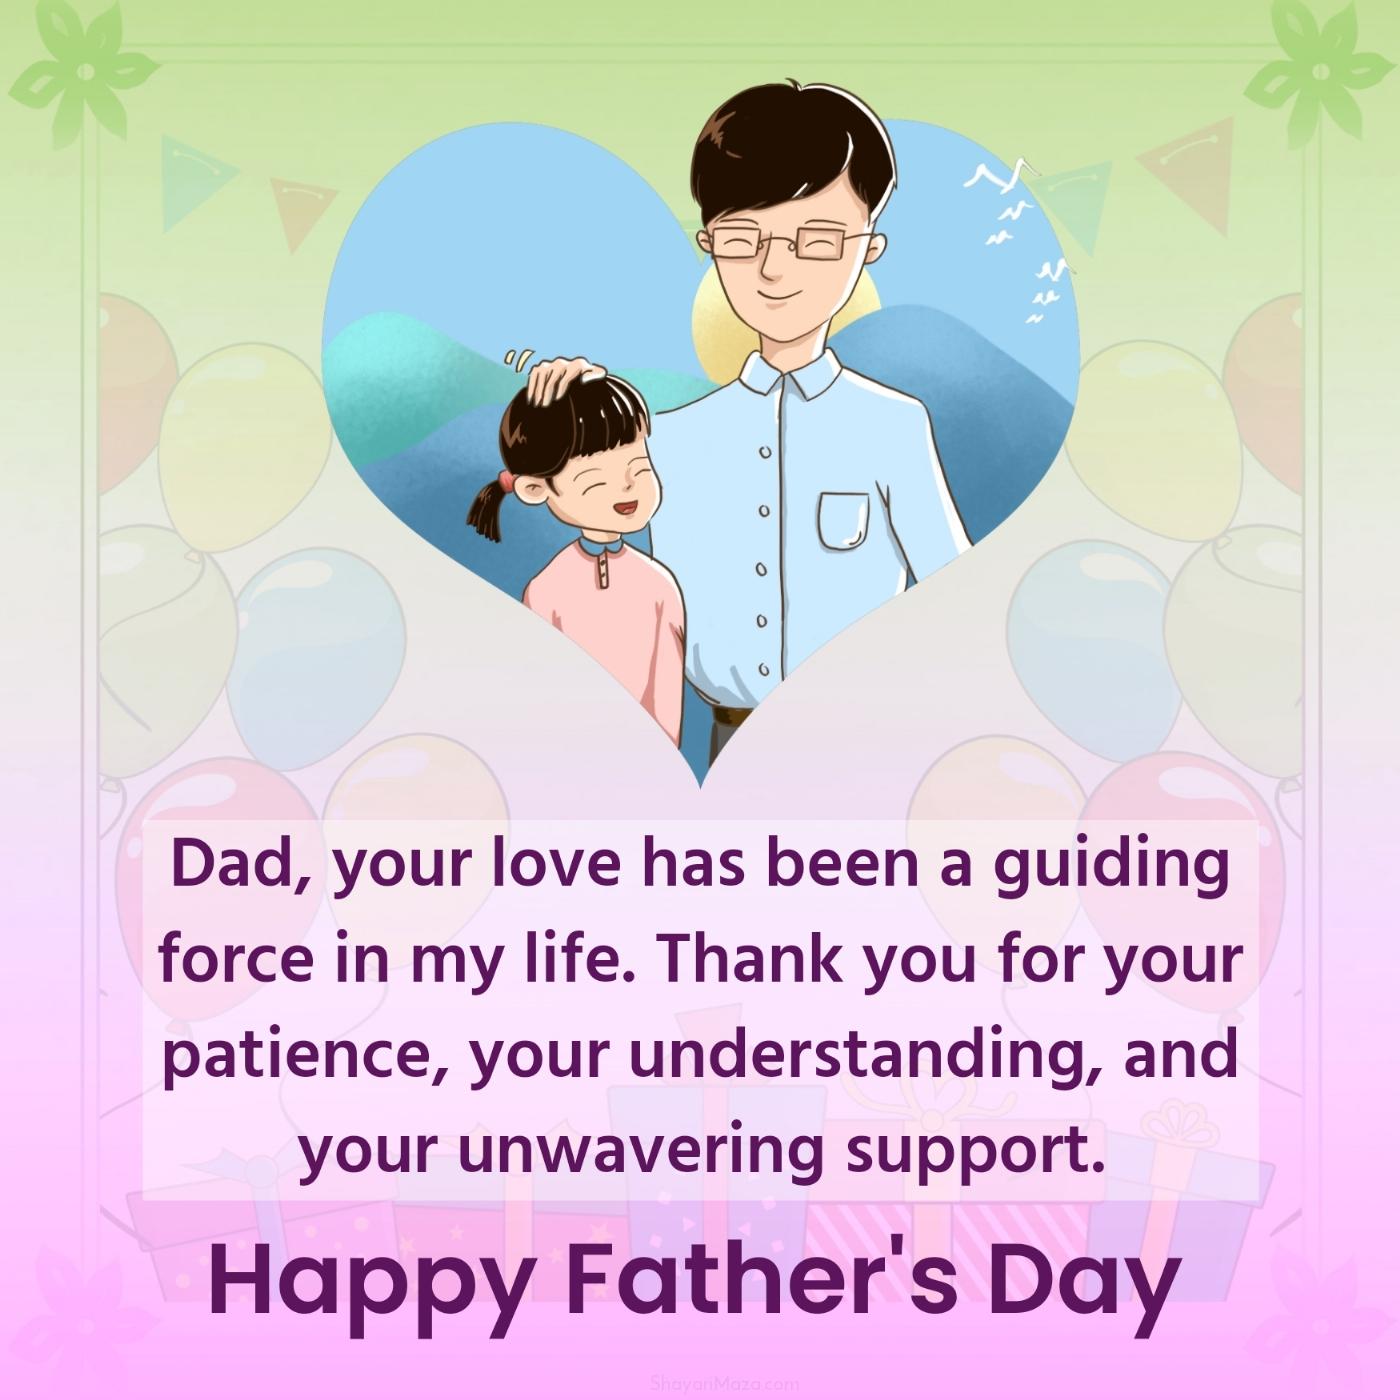 Dad your love has been a guiding force in my life